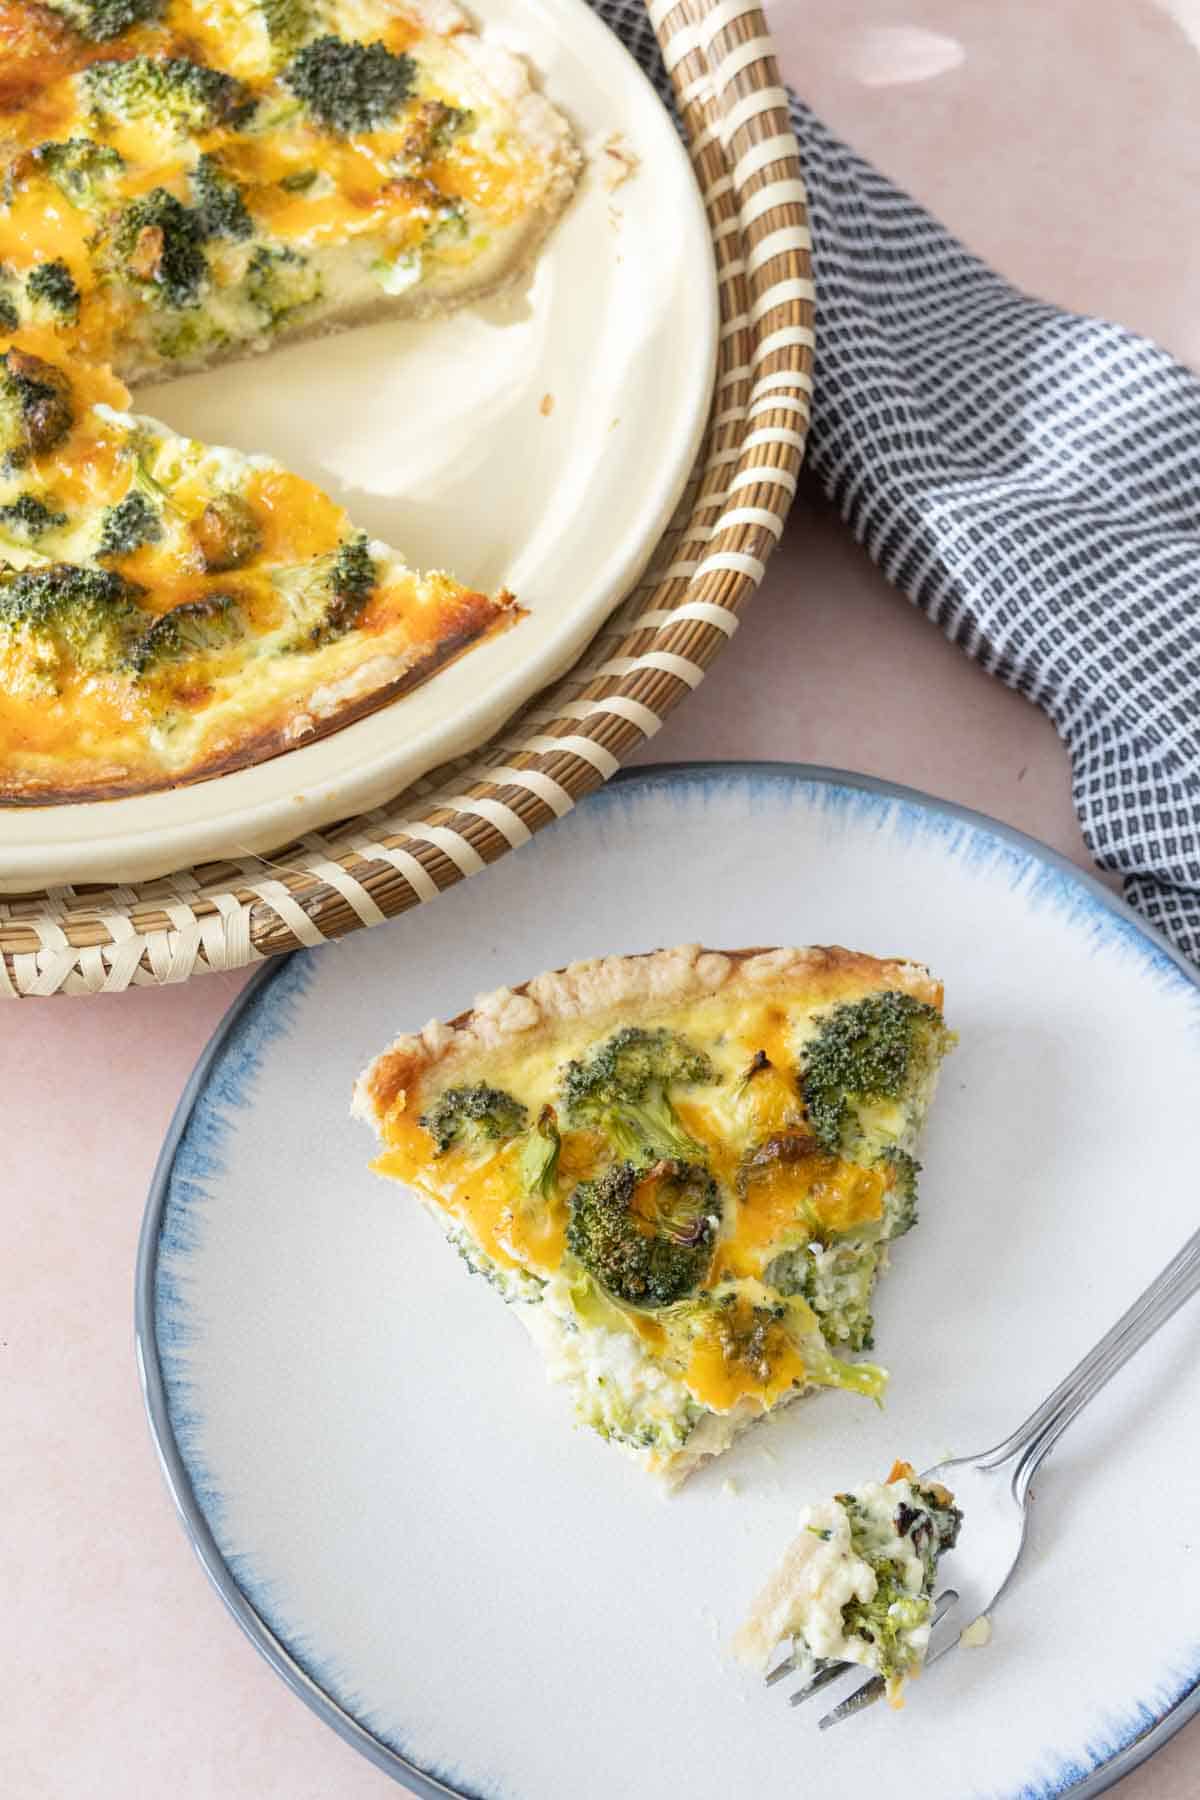 Slice of broccoli cheddar quiche with a piece on a fork.